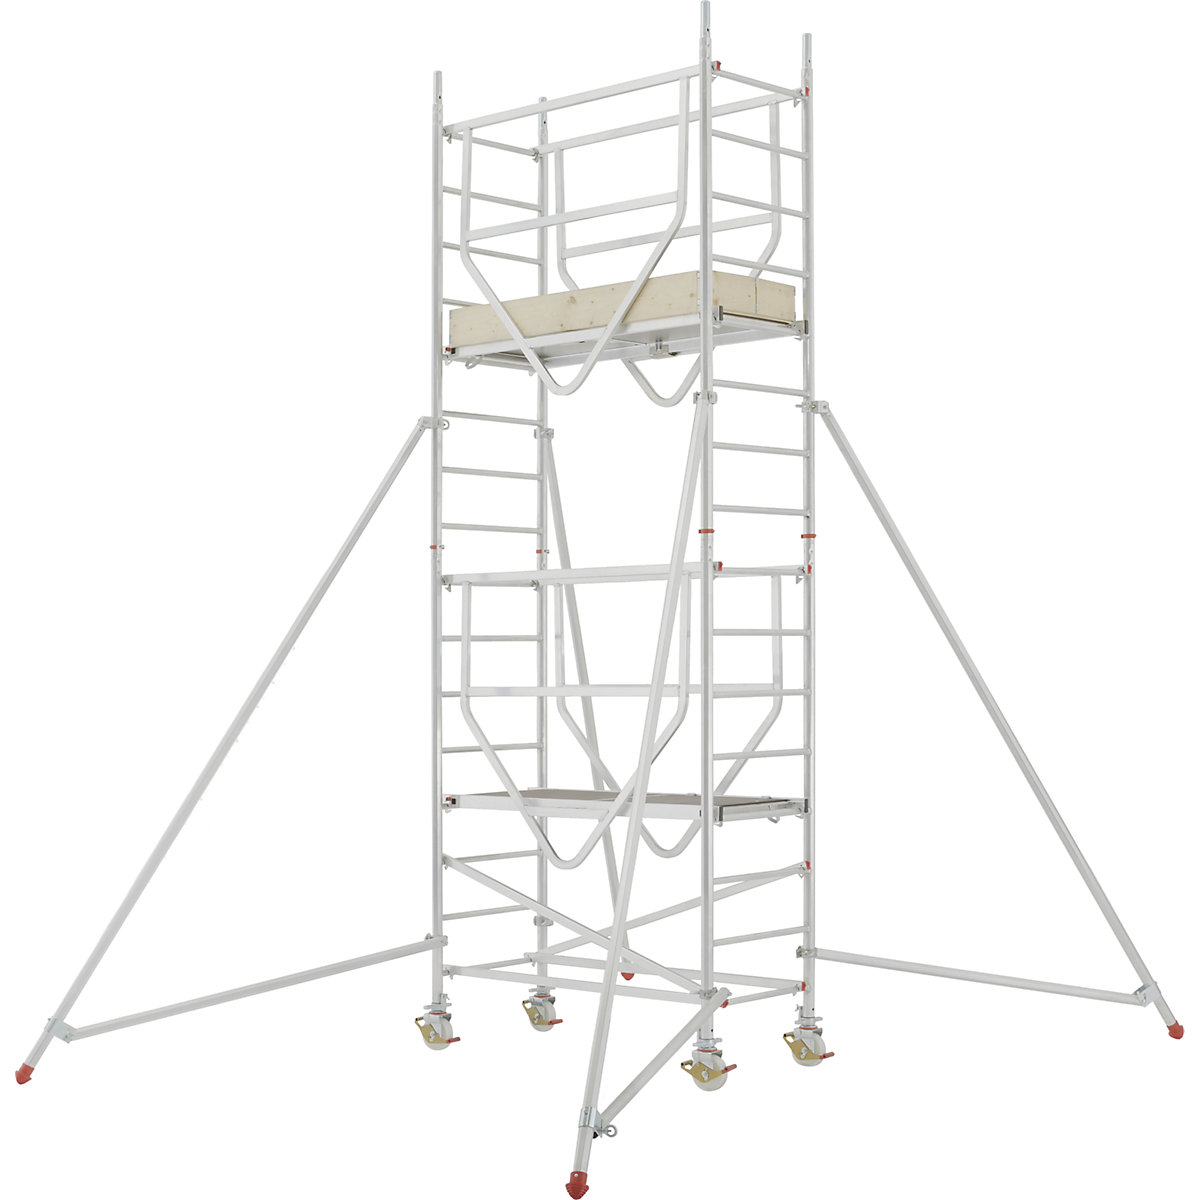 ADVANCED SAFE-T 7070 mobile access tower – HYMER, welded, platform 1.58 x 0.61 m, module 1+2-6